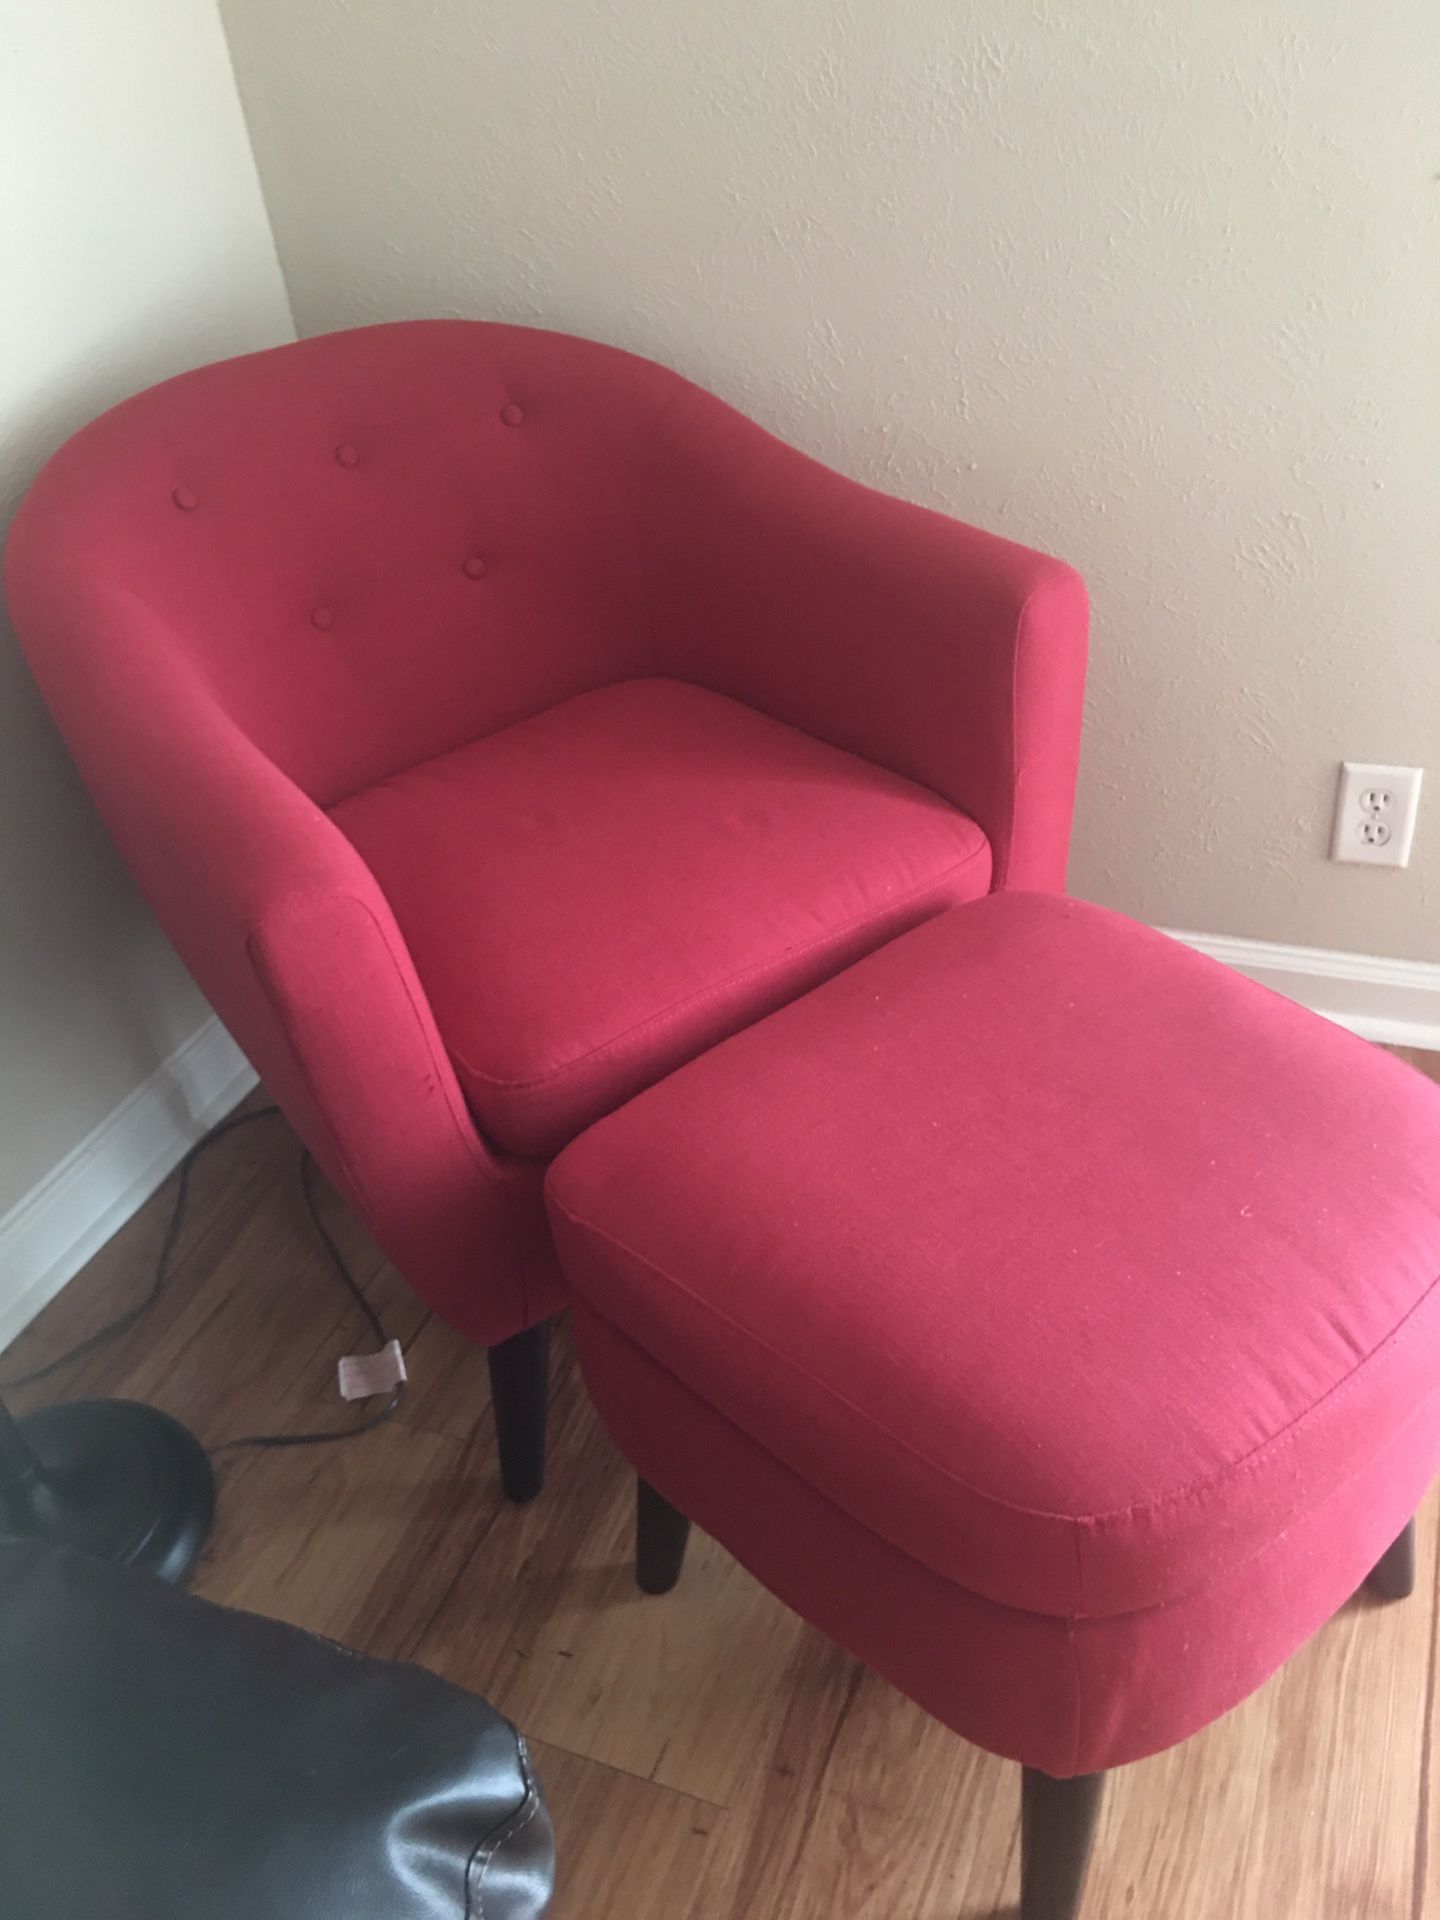 Red accent chair from Wayfair, ottoman included